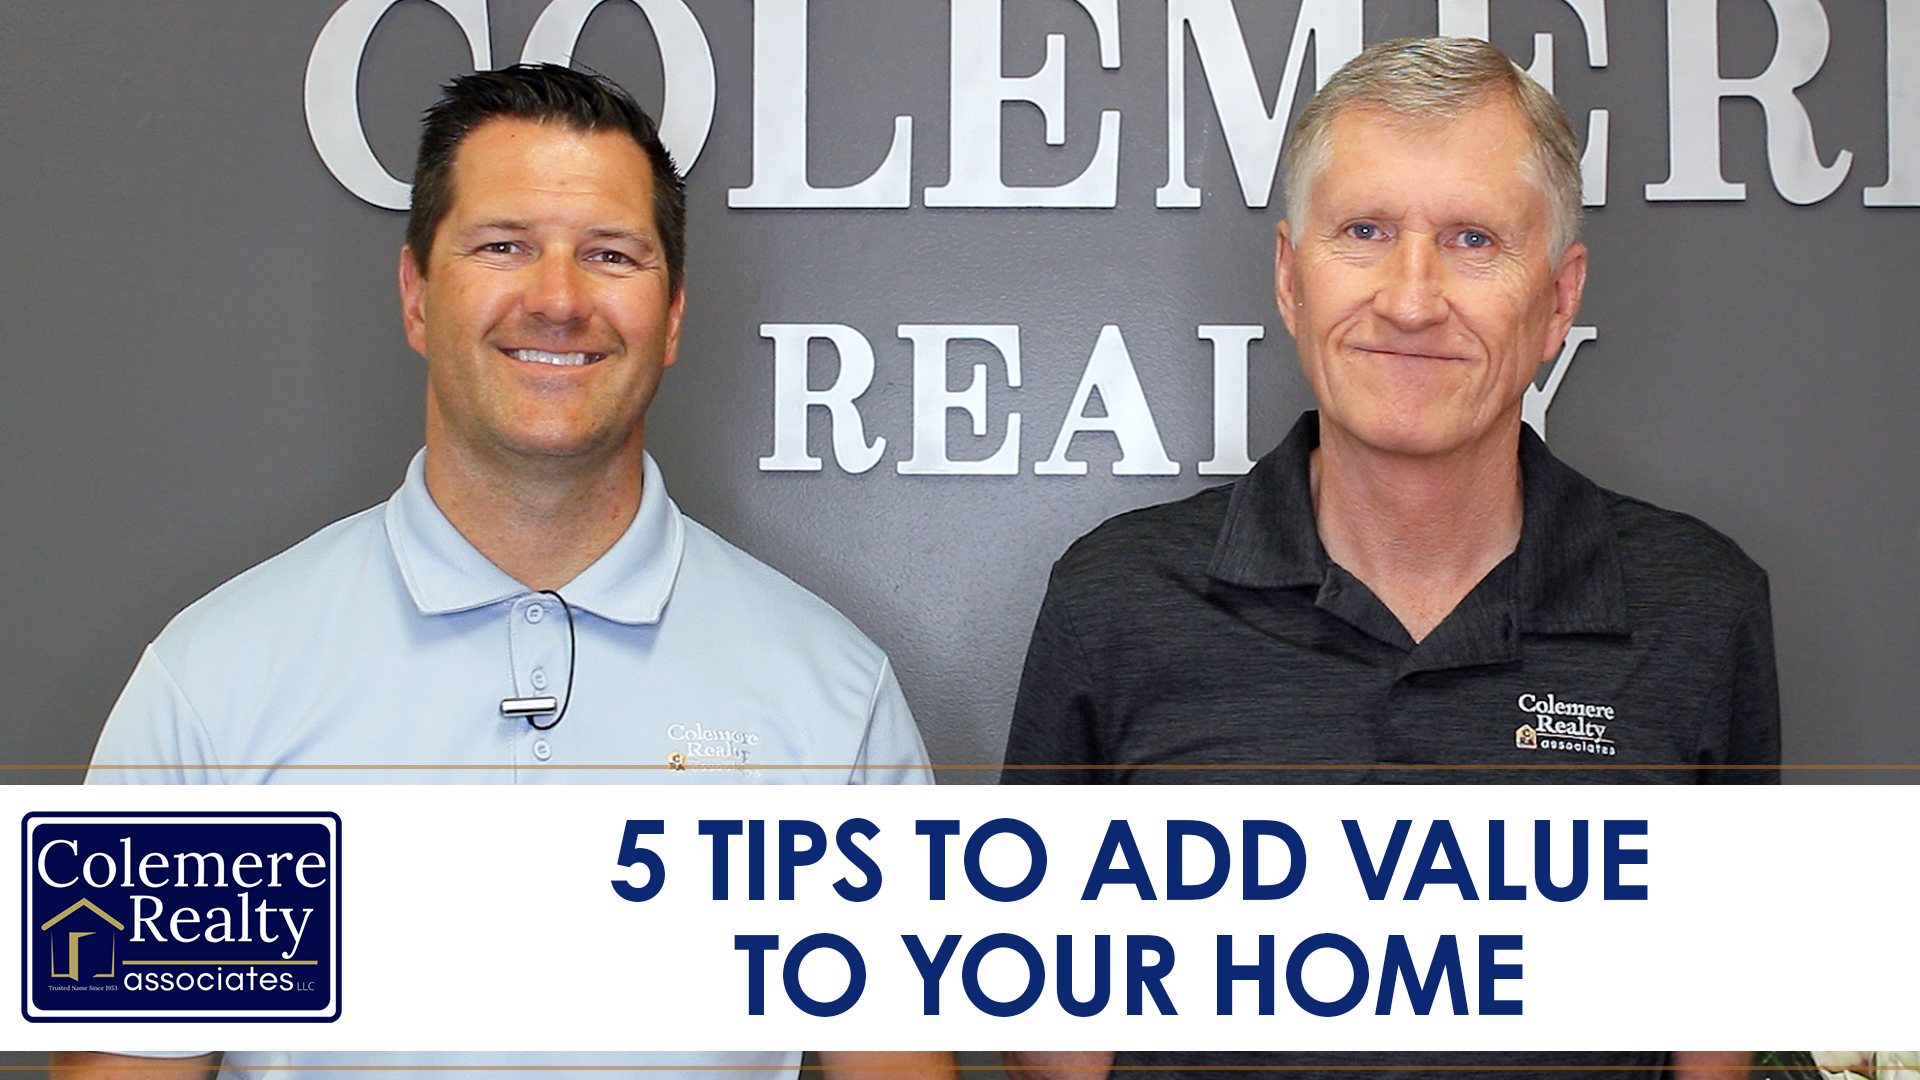 5 Easy Ways To Increase Your Home’s Value